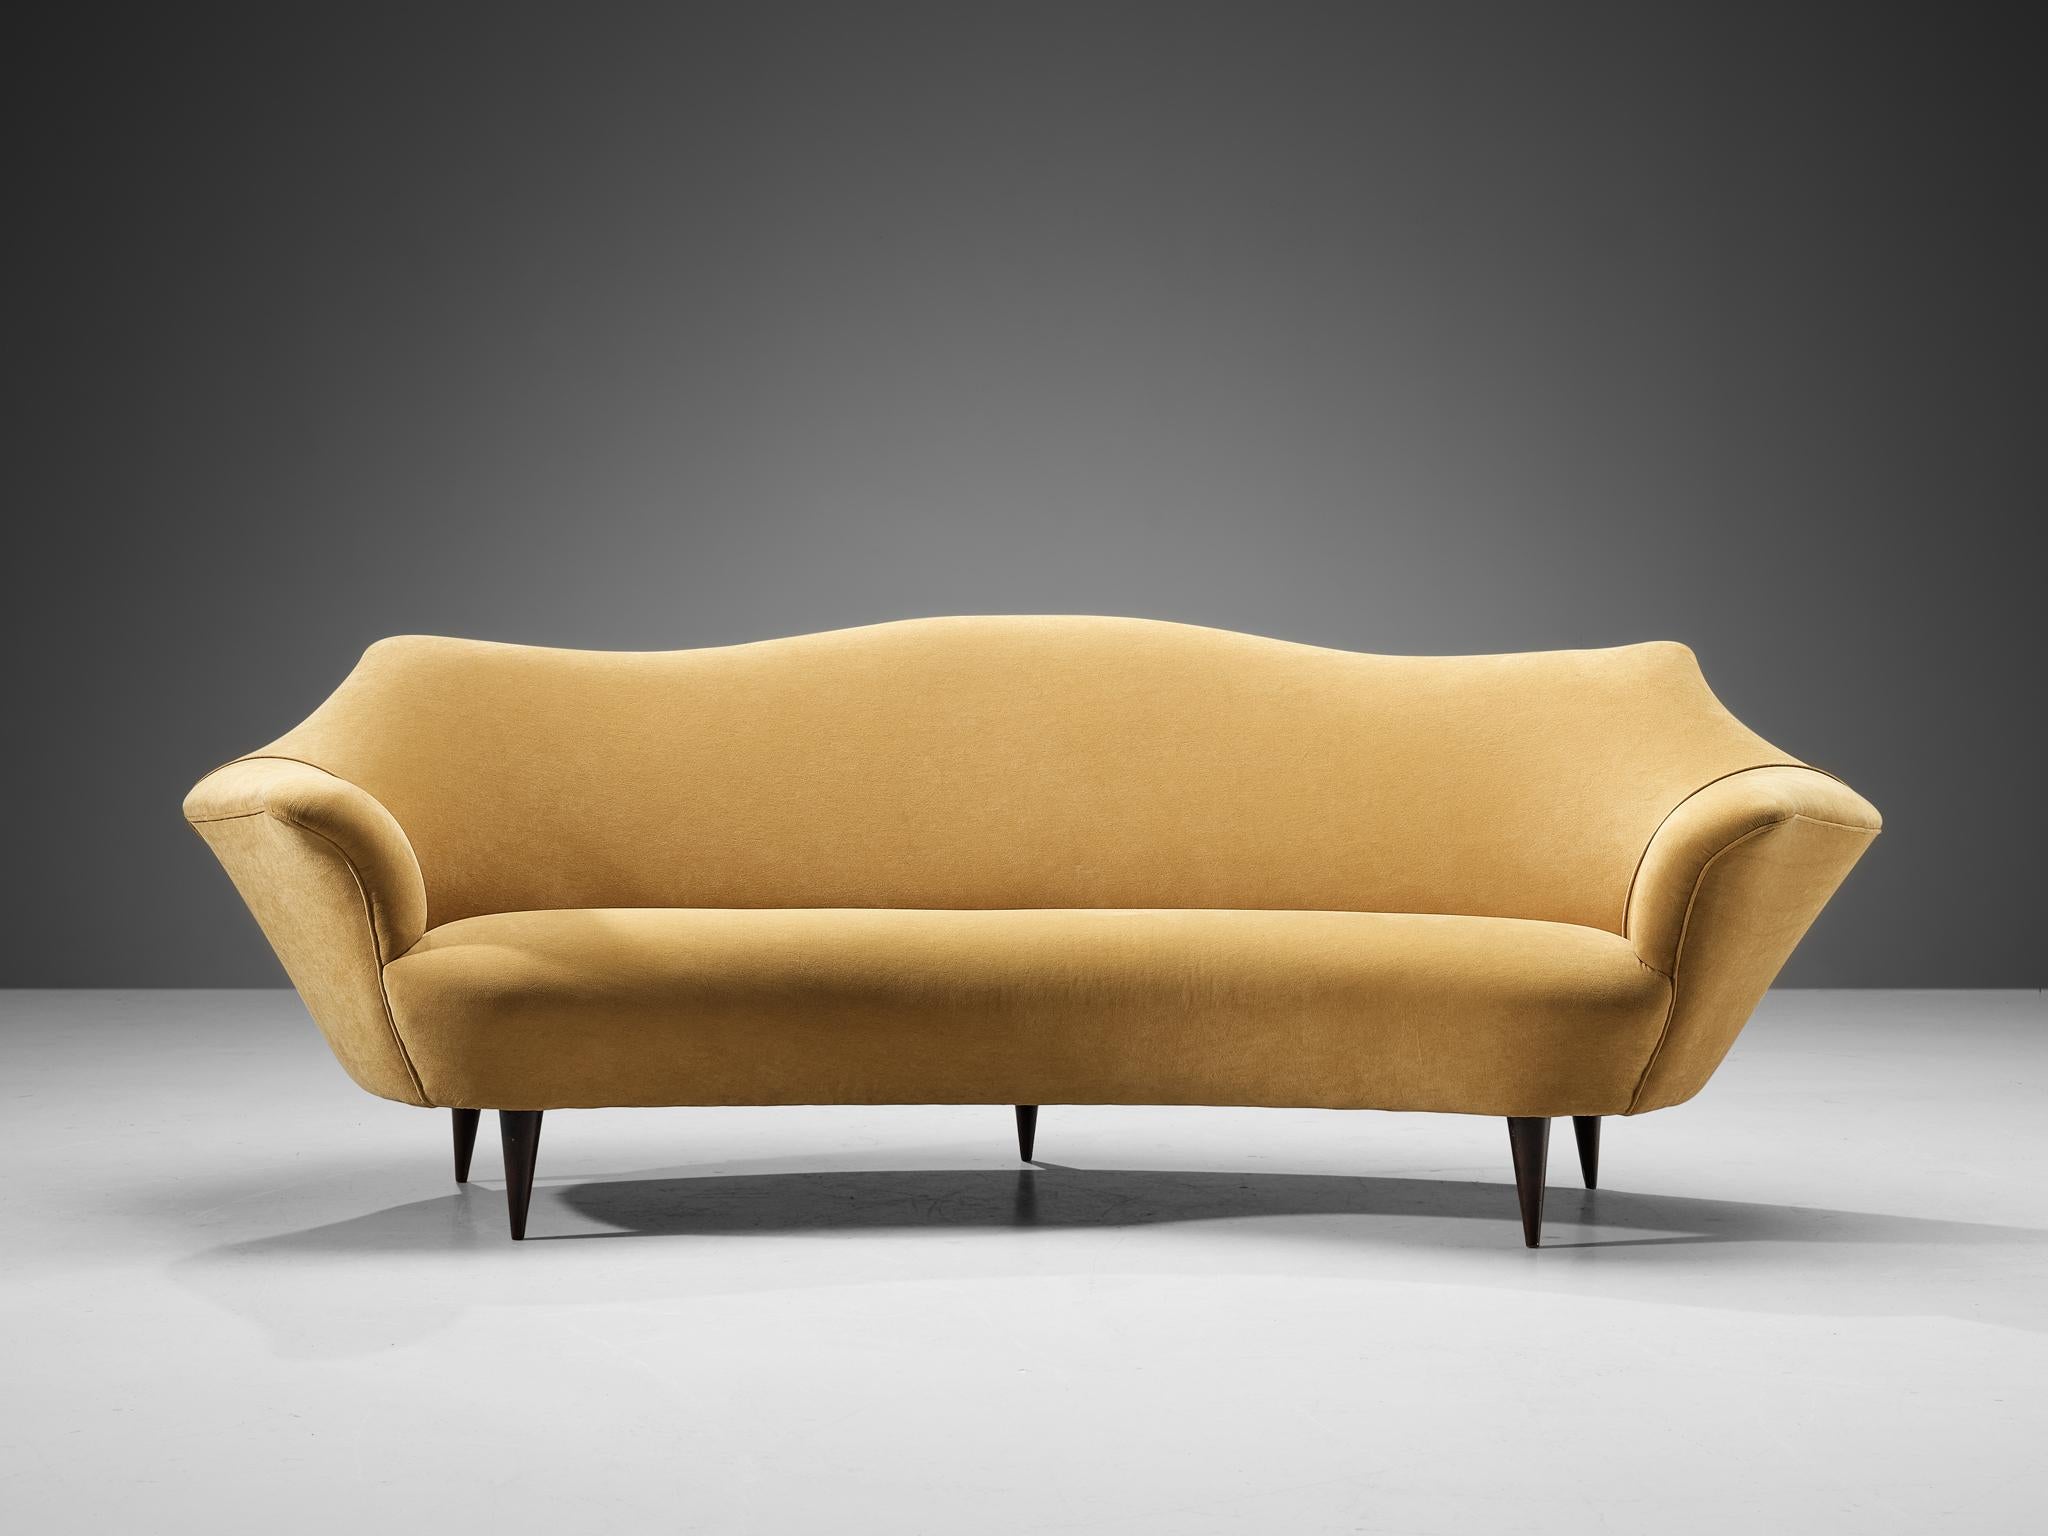 Sofa, velvet, stained ash, Italy, 1950s

This lovely sofa is characterized by a sophisticated aesthetic due to its curvaceous lines and round edges. The seating area is supported by sleek outward-facing legs in stained ash. The top of the backrest